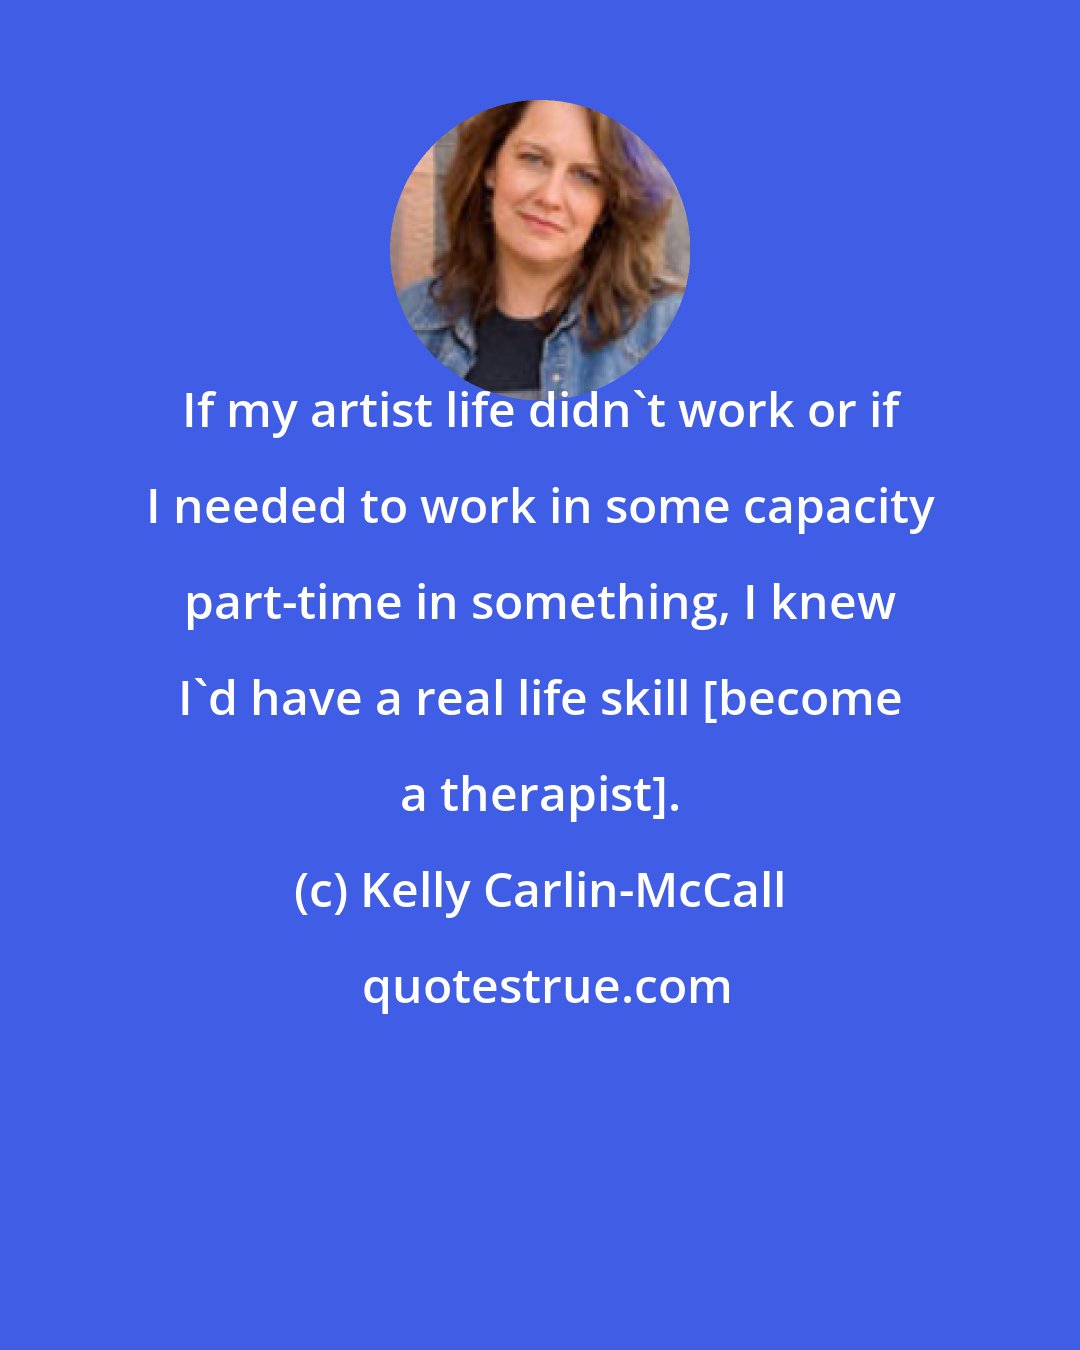 Kelly Carlin-McCall: If my artist life didn't work or if I needed to work in some capacity part-time in something, I knew I'd have a real life skill [become a therapist].